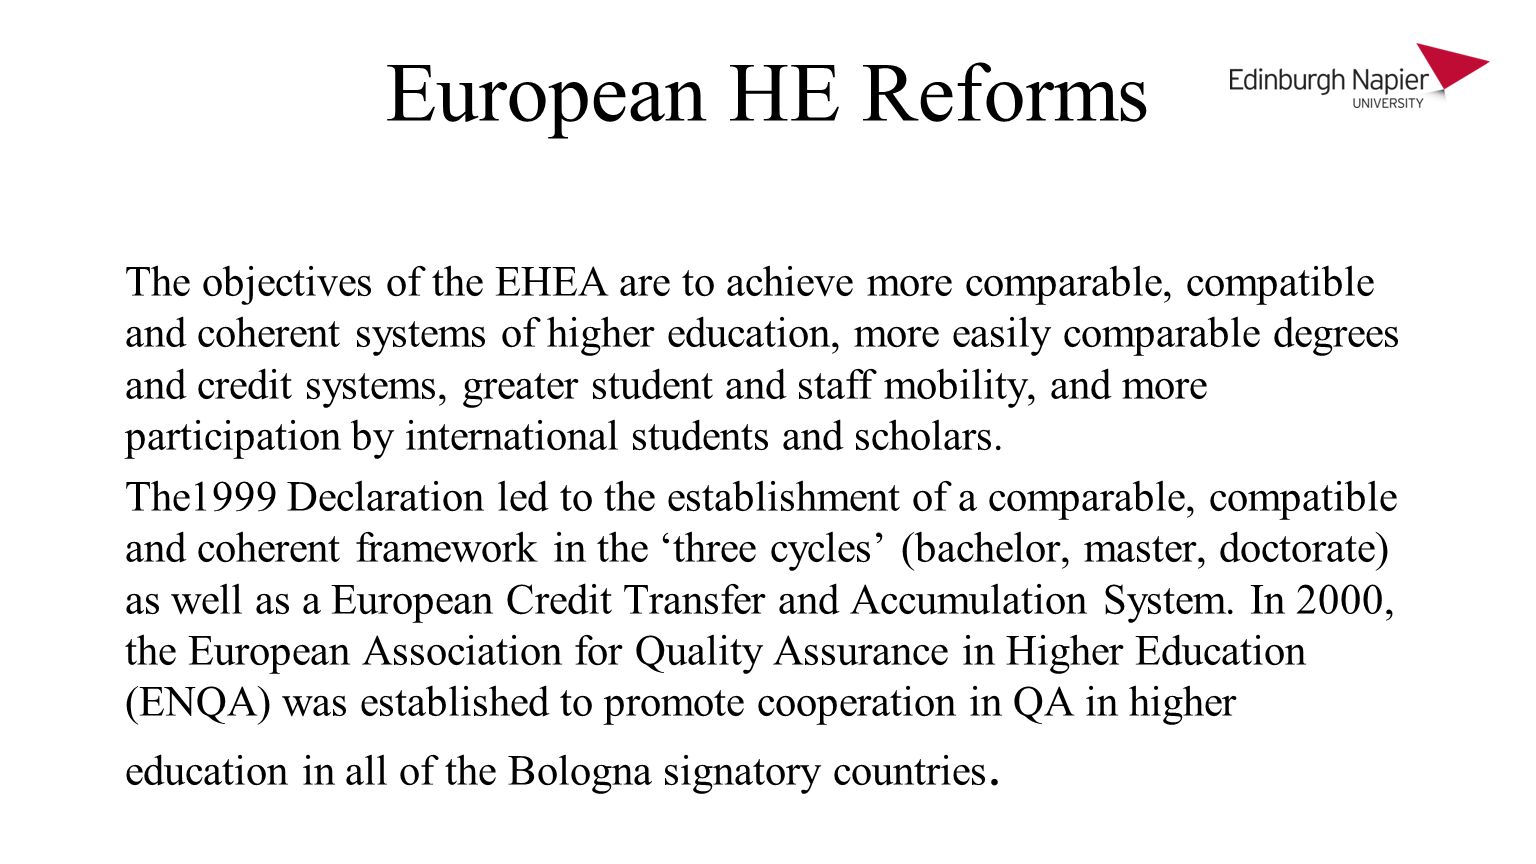 European HE Reforms The objectives of the EHEA are to achieve more comparable, compatible and coherent systems of higher education, more easily comparable degrees and credit systems, greater student and staff mobility, and more participation by international students and scholars.